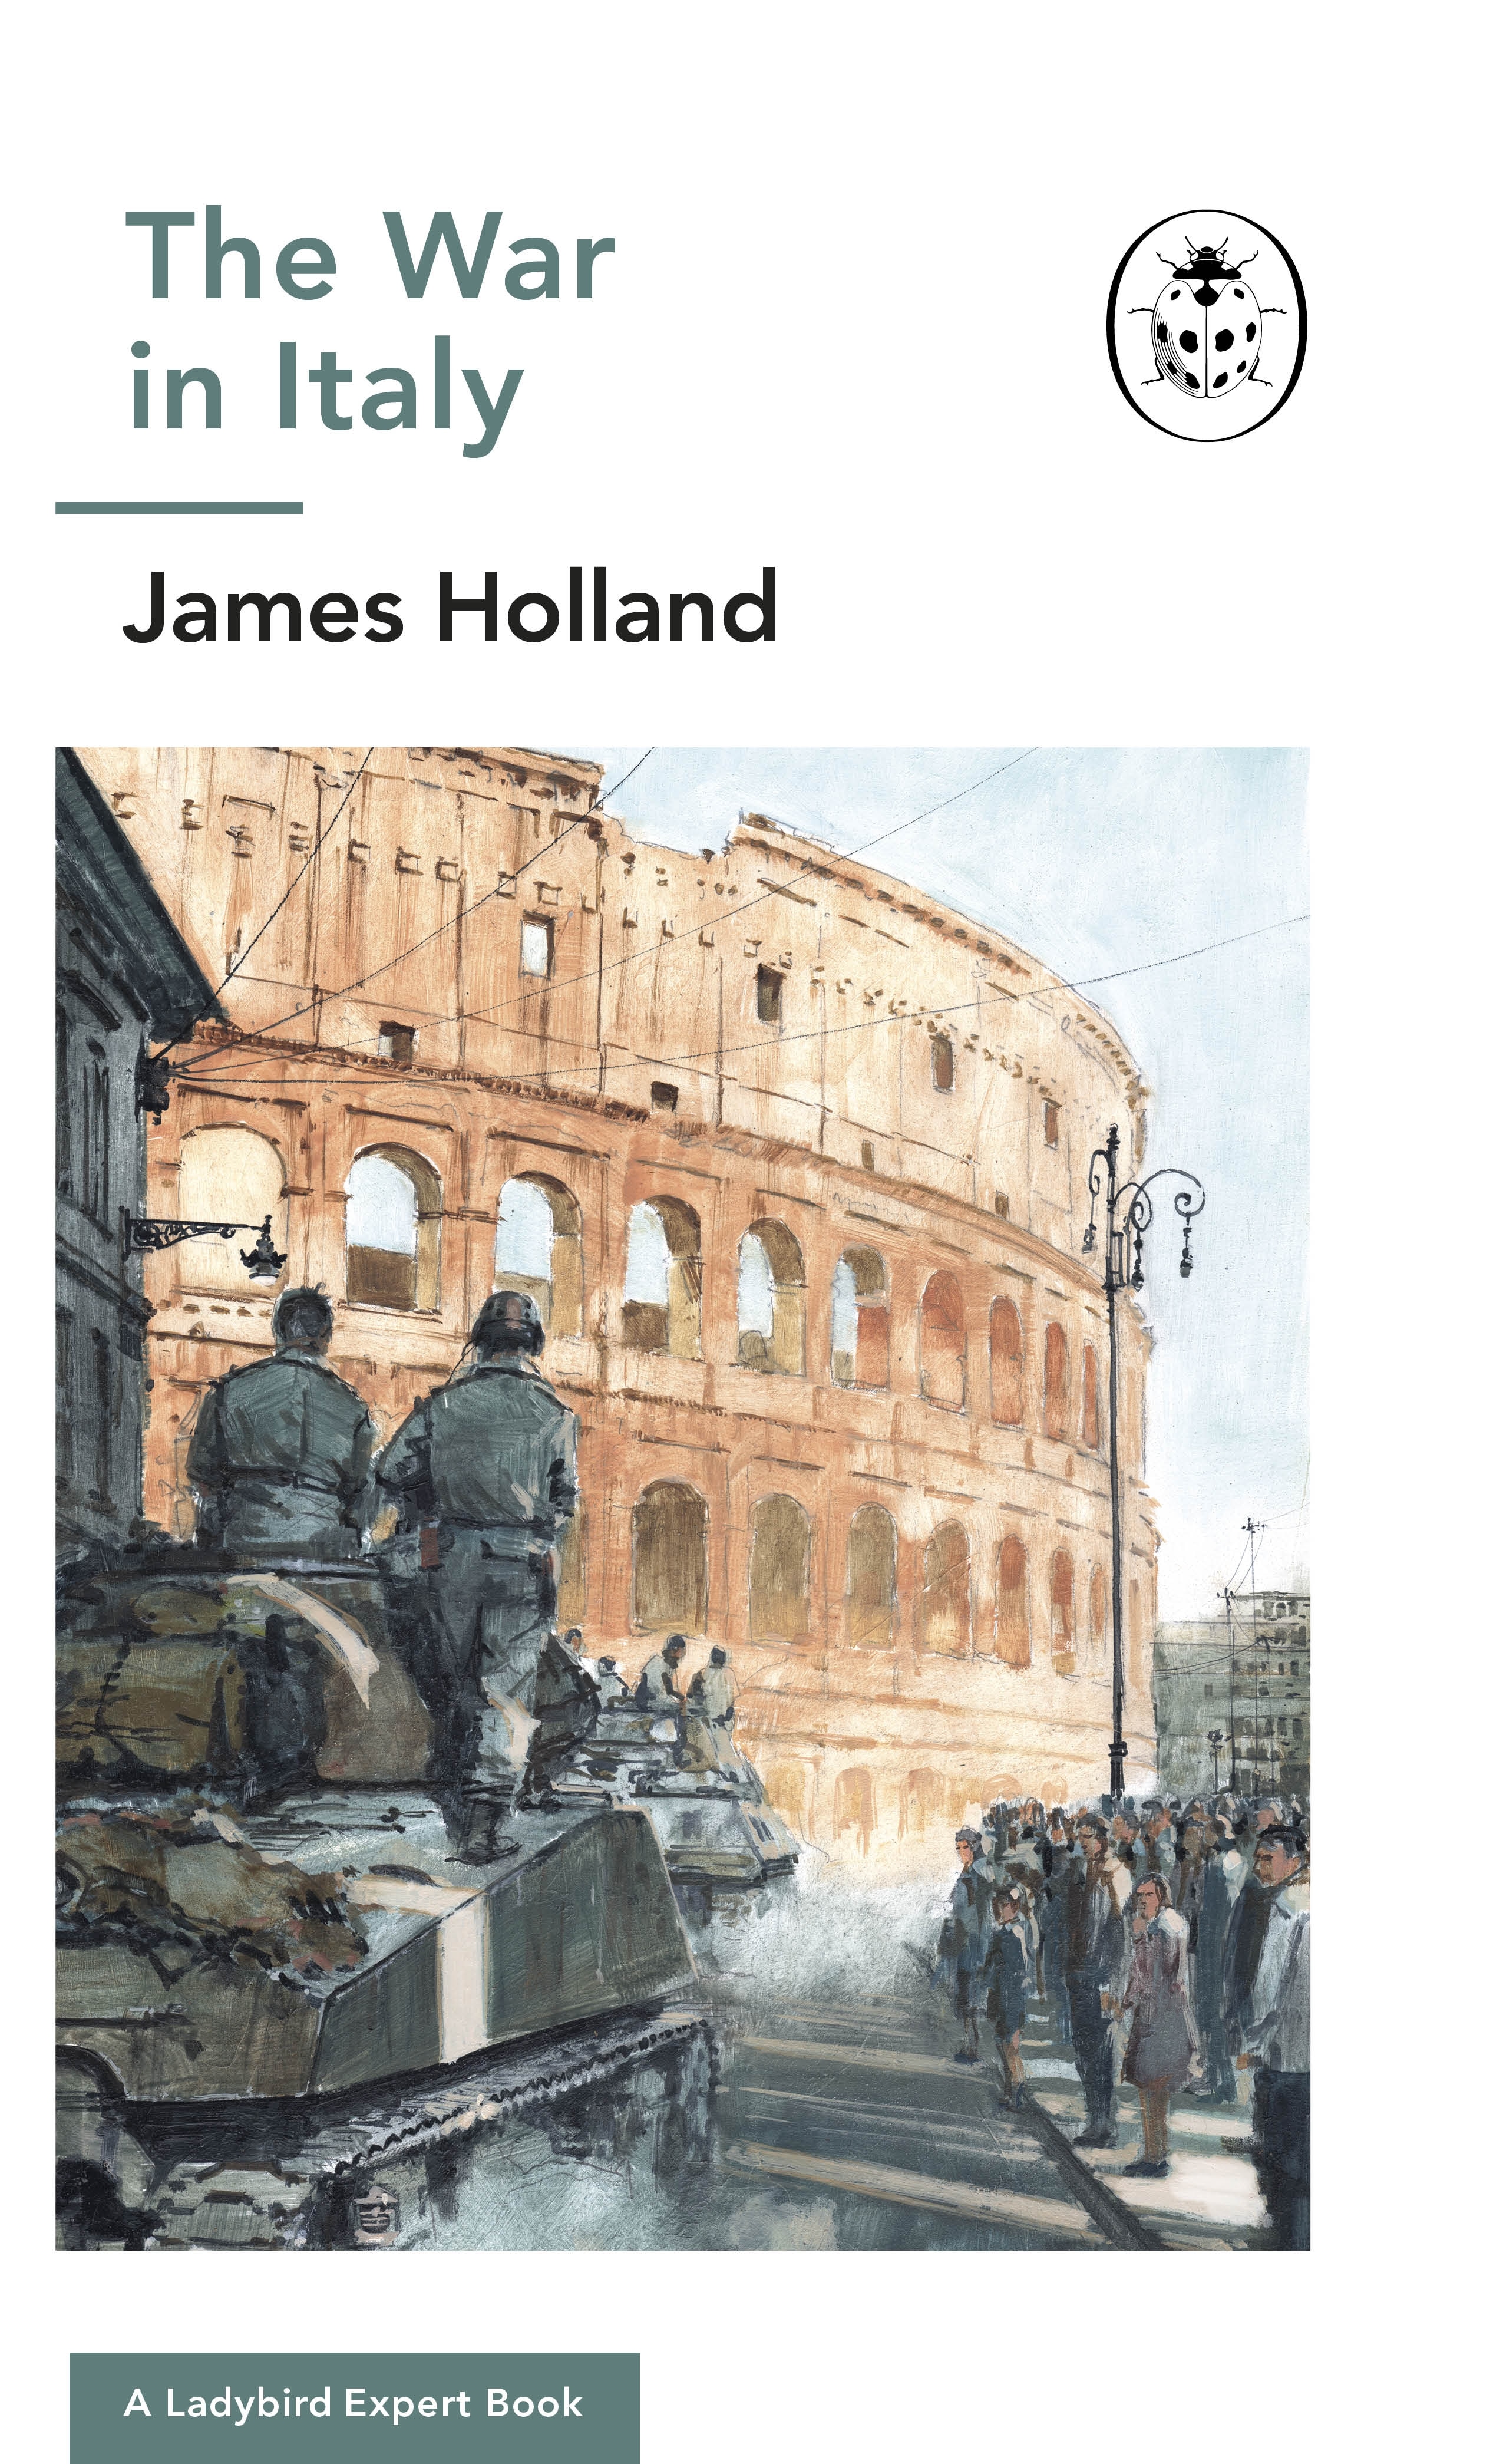 Book “The War in Italy: A Ladybird Expert Book” by James Holland — April 1, 2021